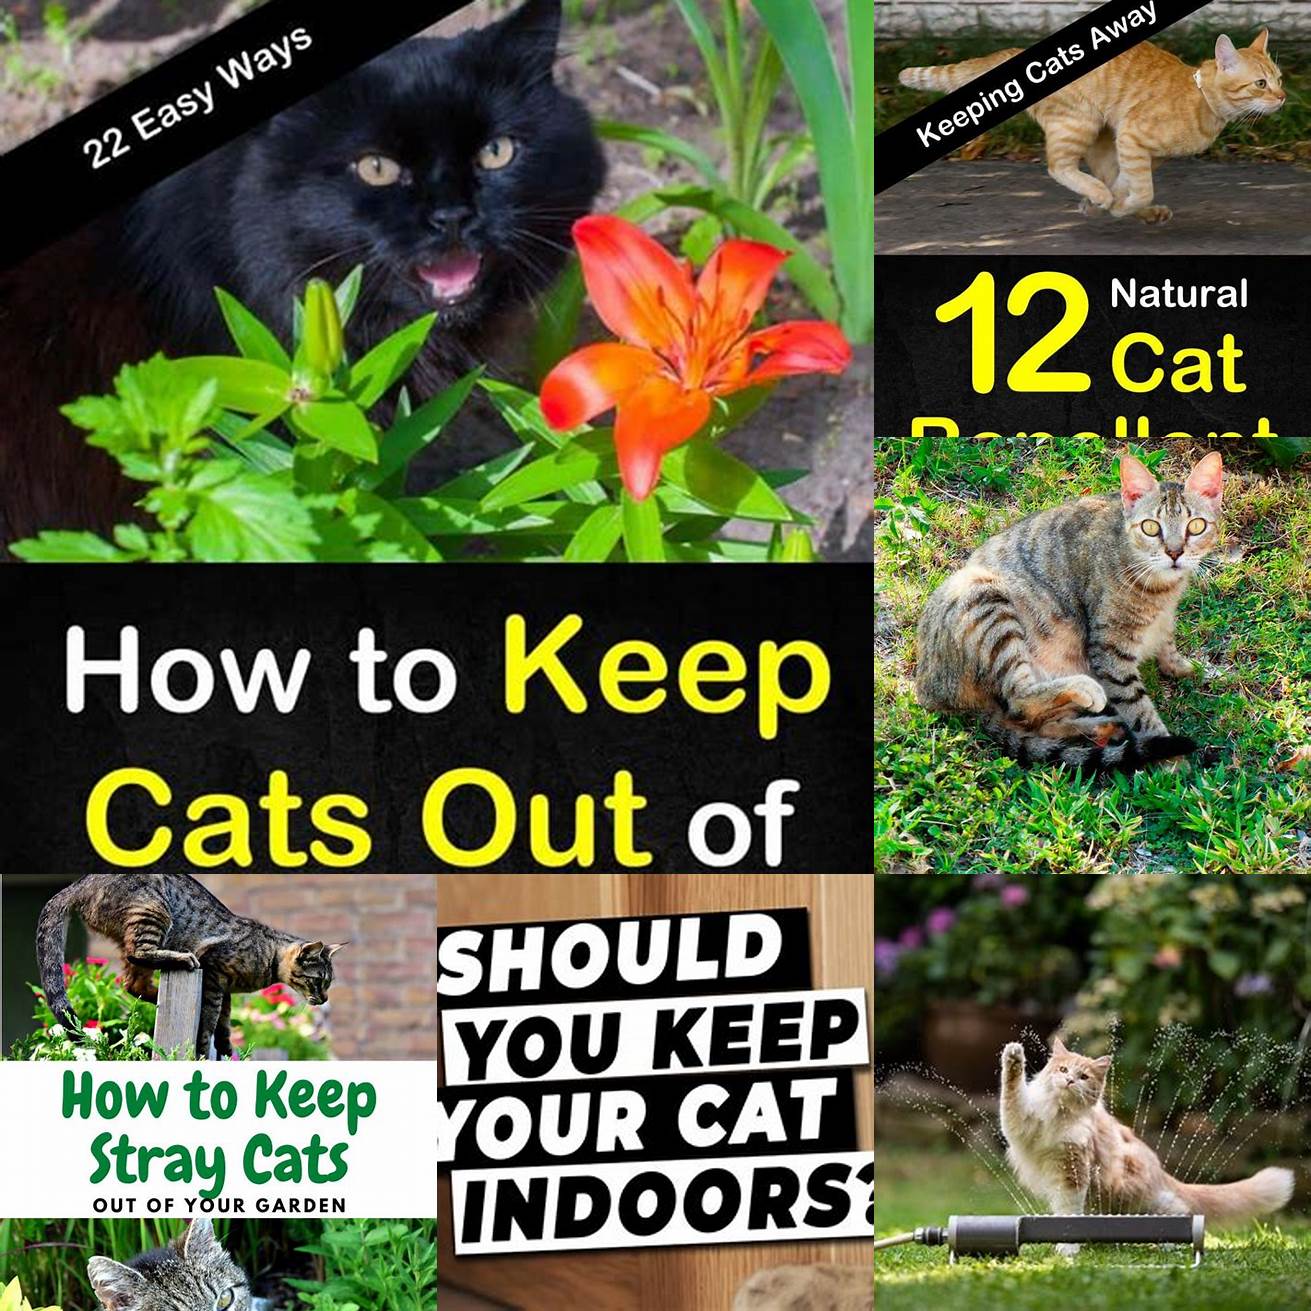 3 Keeps your cat off the ground